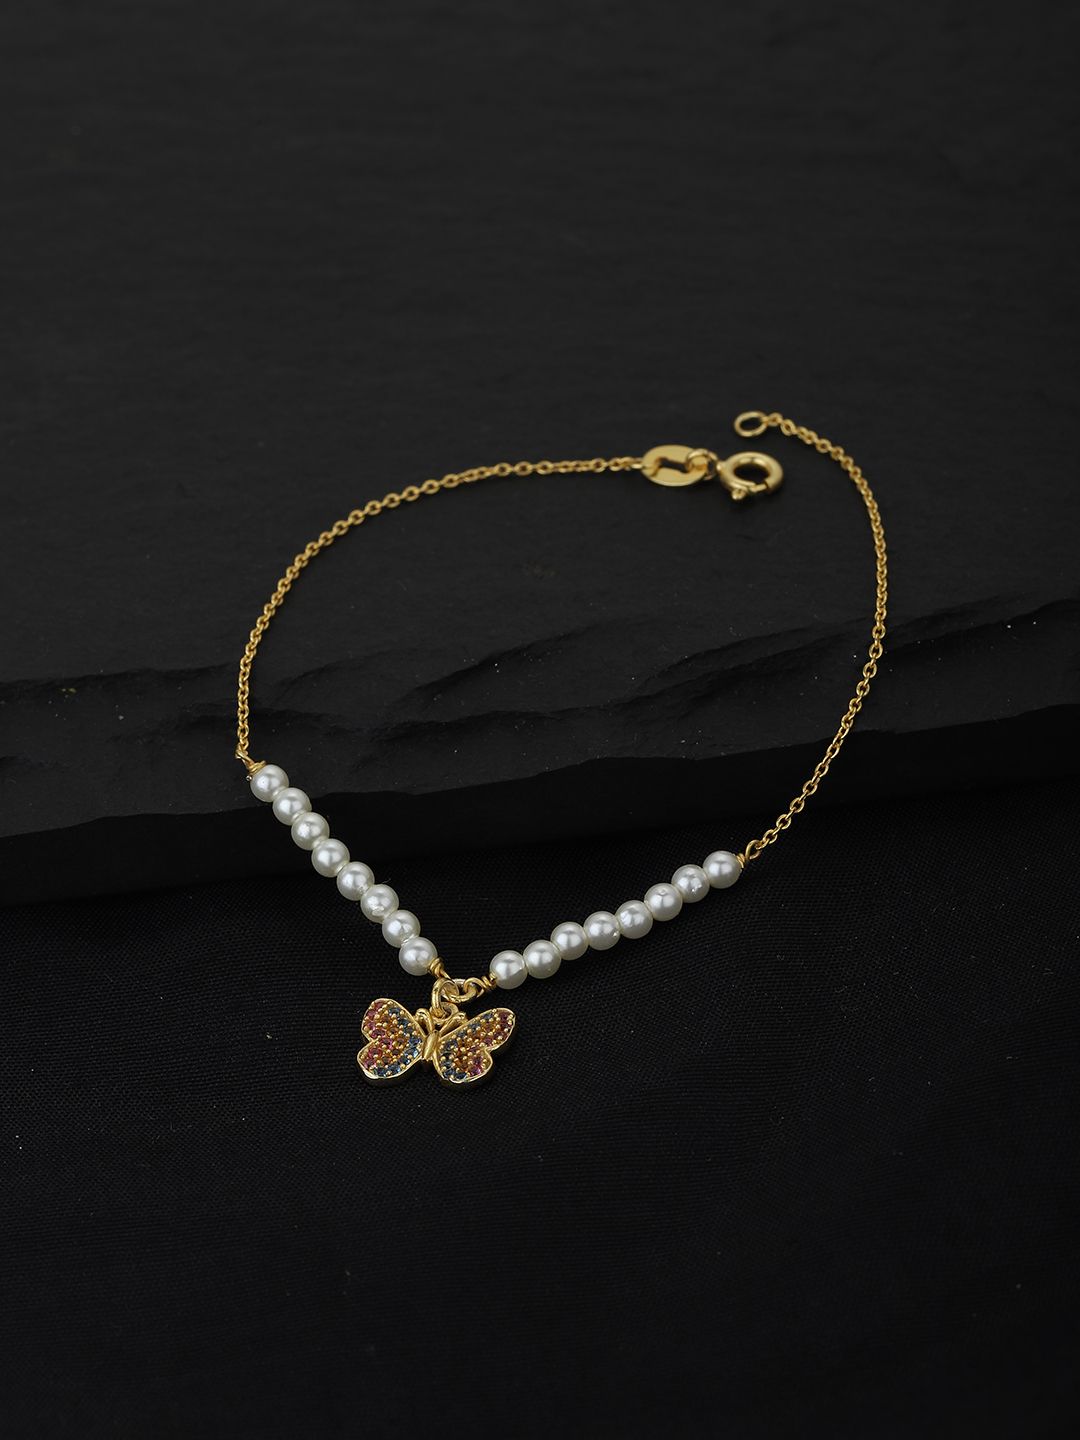 Carlton London Women Gold-Plated White Pearls Handcrafted Bracelet Price in India